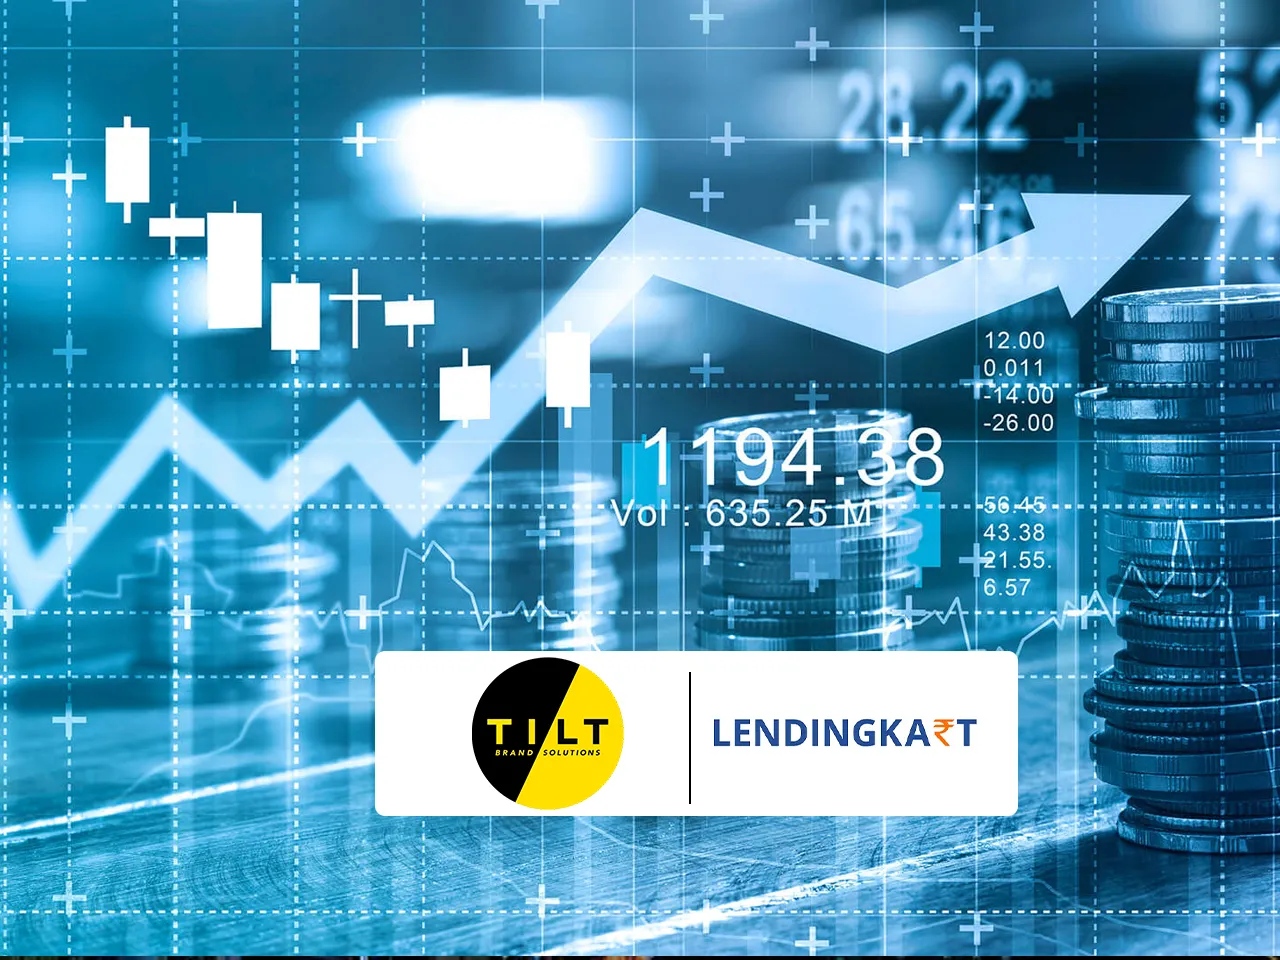 Lendingkart appoints Tilt Brand Solutions as its Communication partner for their upcoming campaign